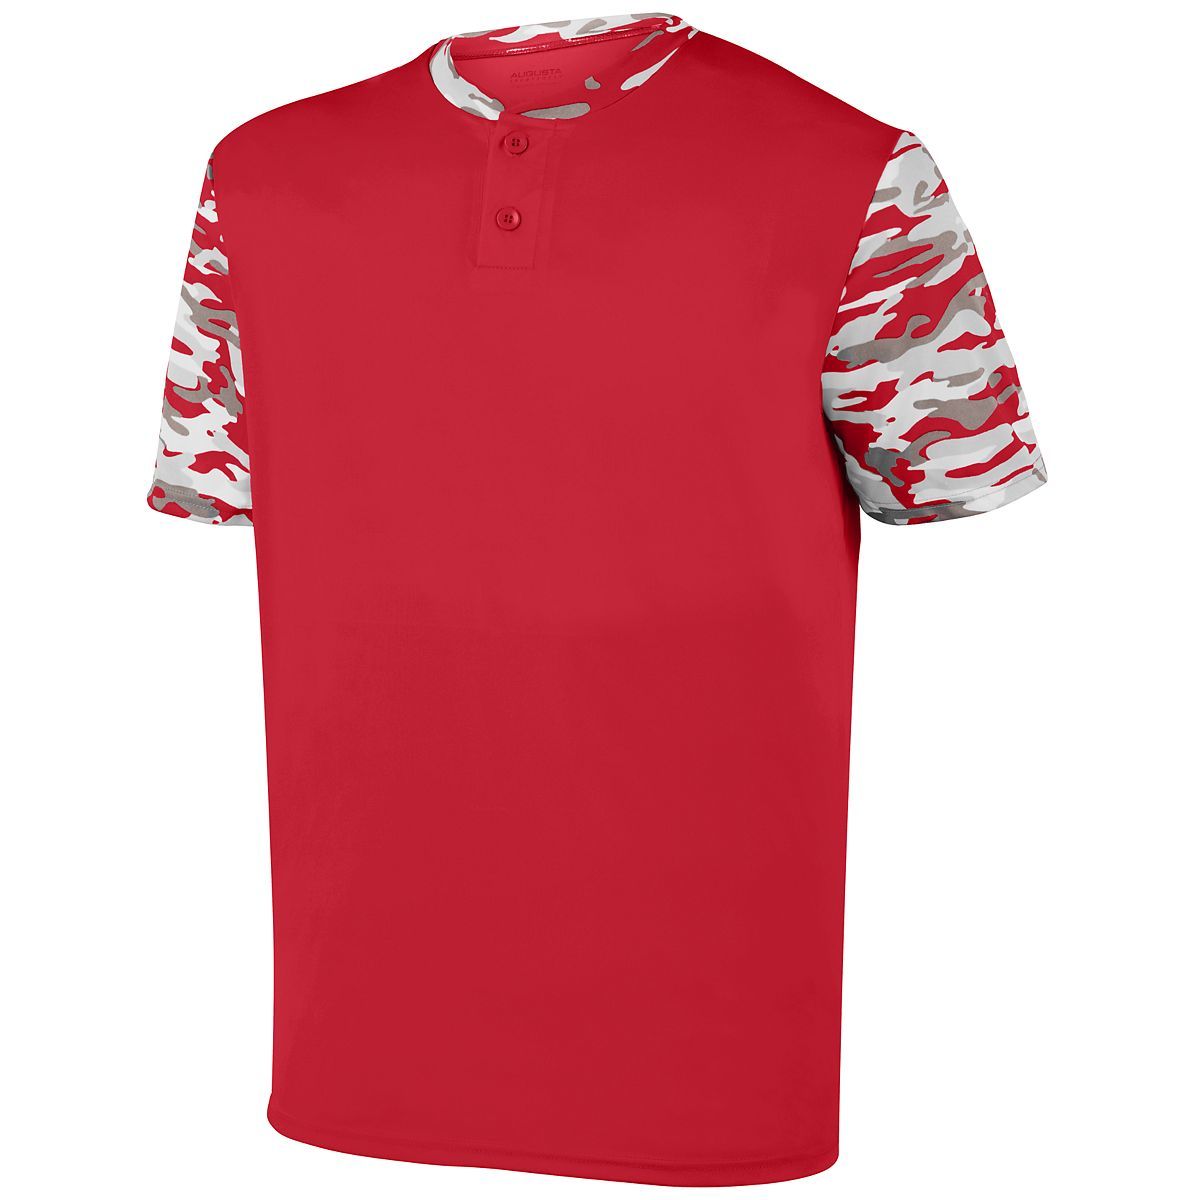 Augusta Sportswear Youth Pop Fly Jersey in Red/Red Mod  -Part of the Youth, Youth-Jersey, Augusta-Products, Baseball, Shirts, All-Sports, All-Sports-1 product lines at KanaleyCreations.com